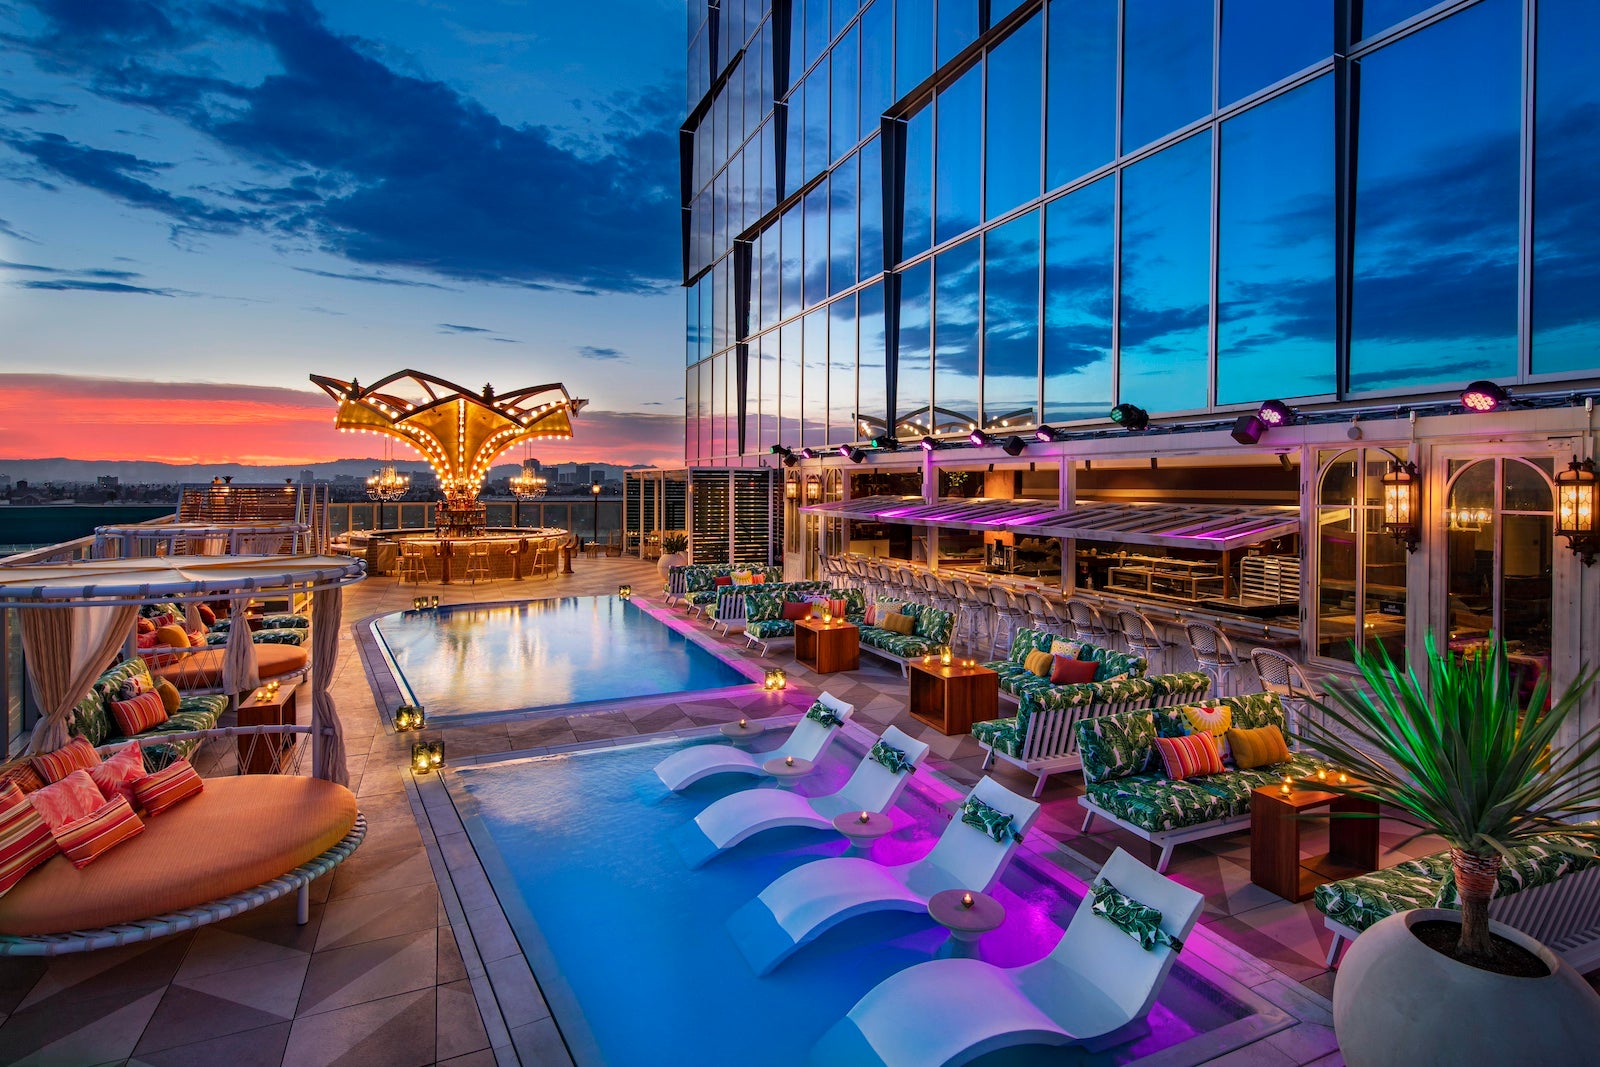 11 best hotels for nightlife — from popular nightclubs to swanky lounges